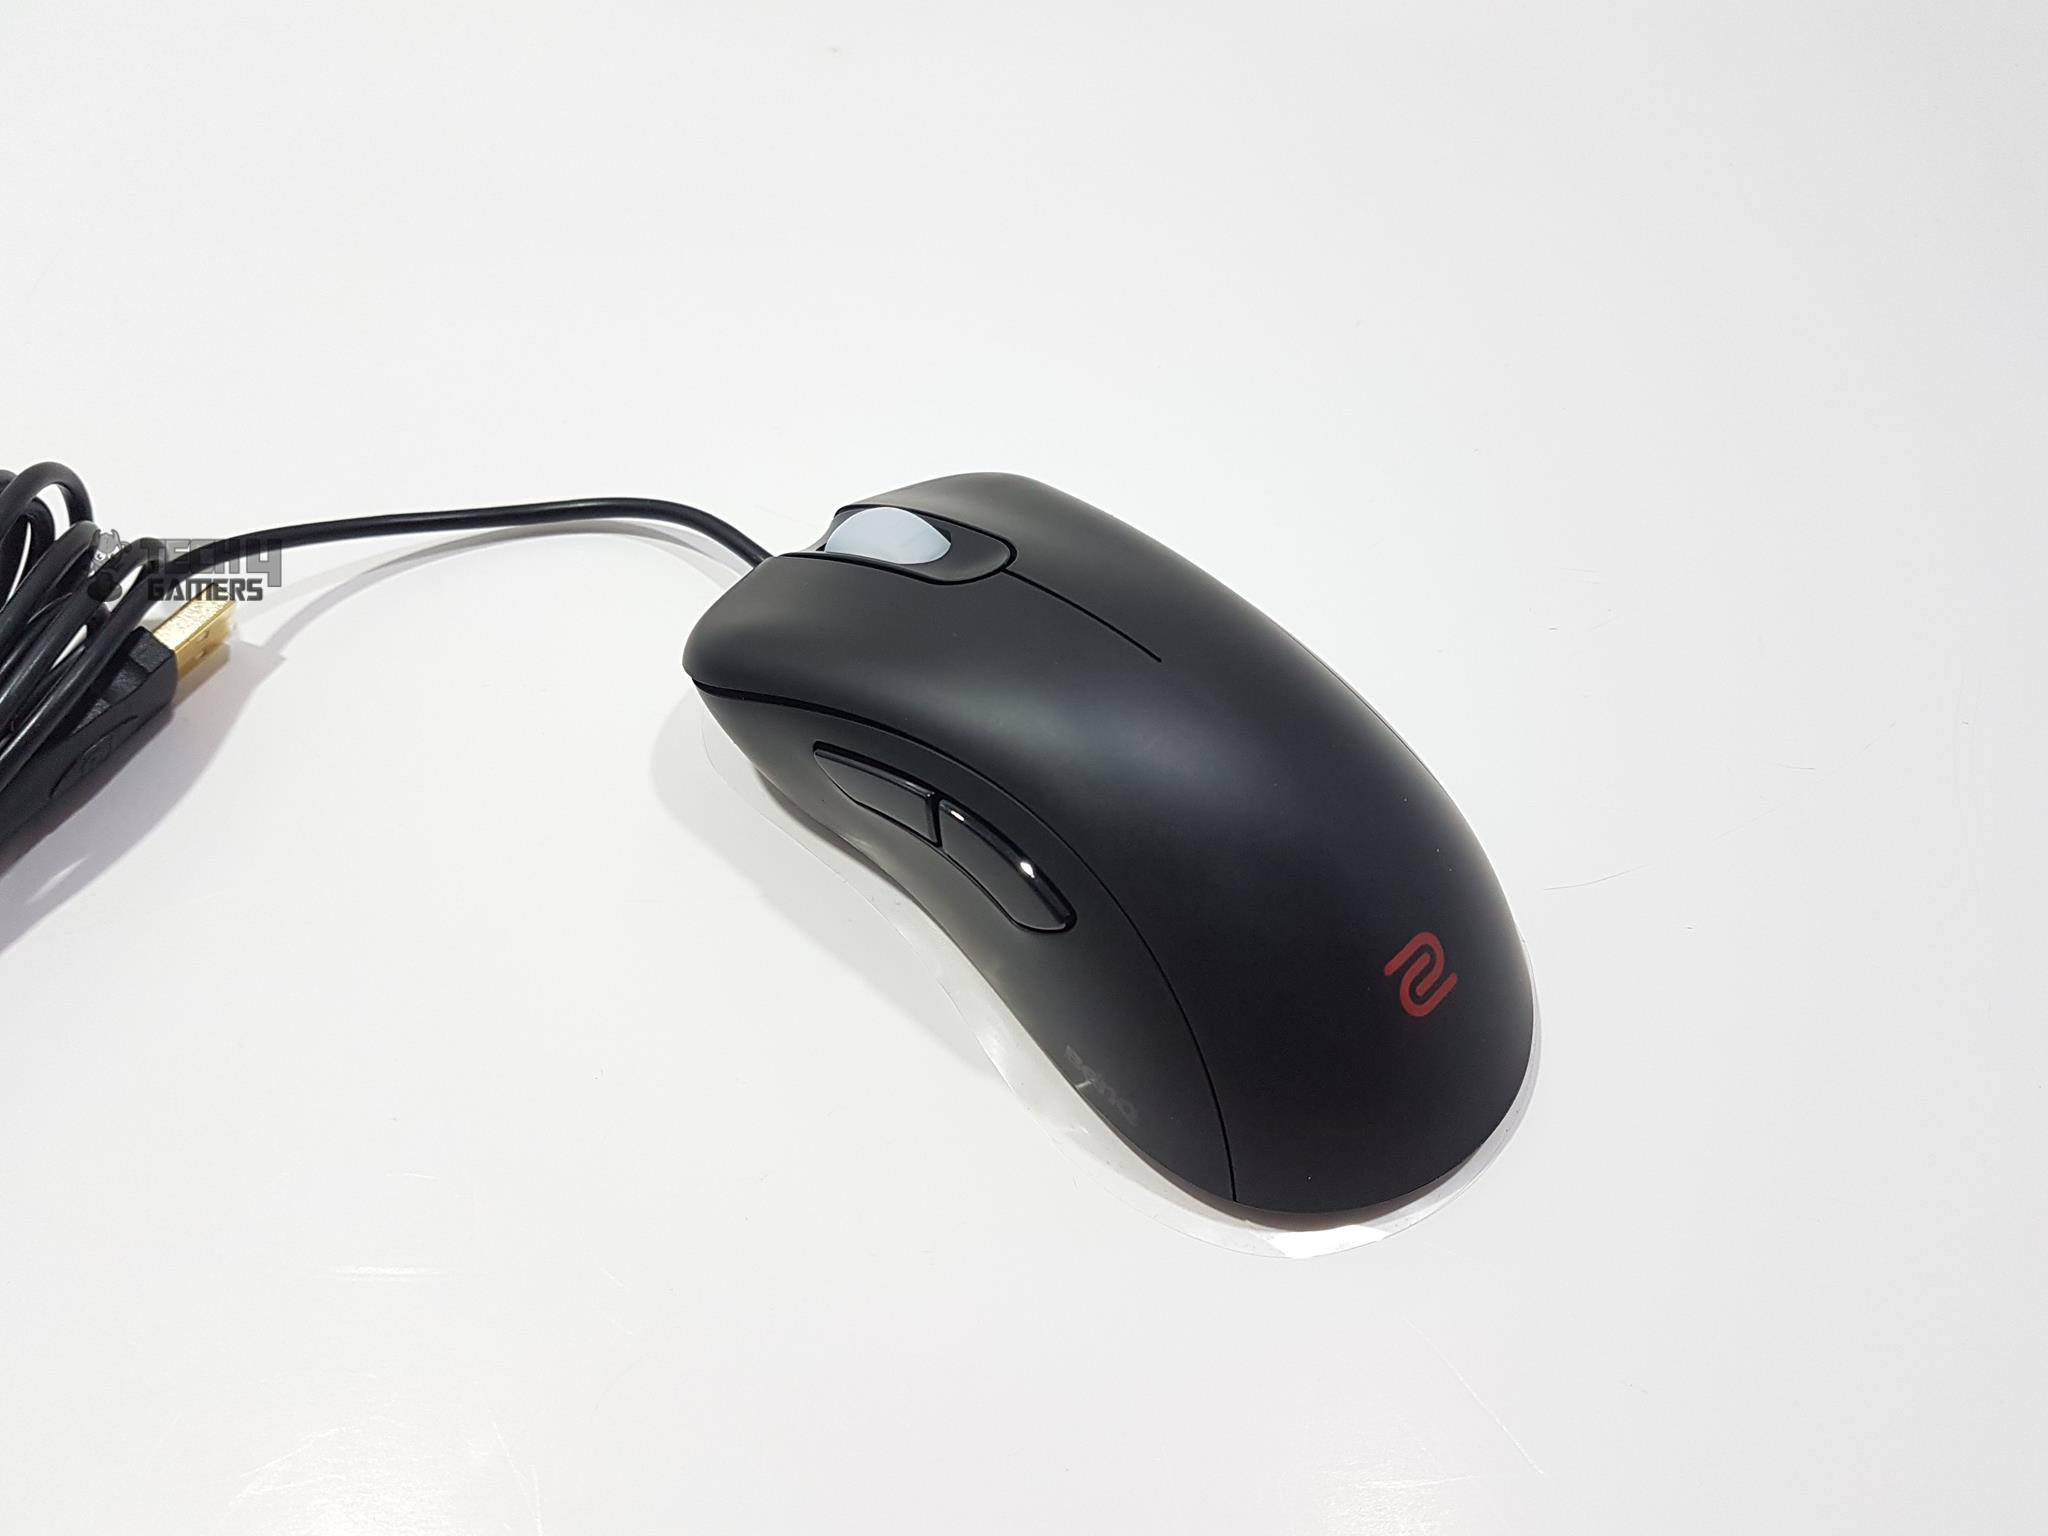 Benq Zowie Ec2 A E Sports Gaming Mouse Review